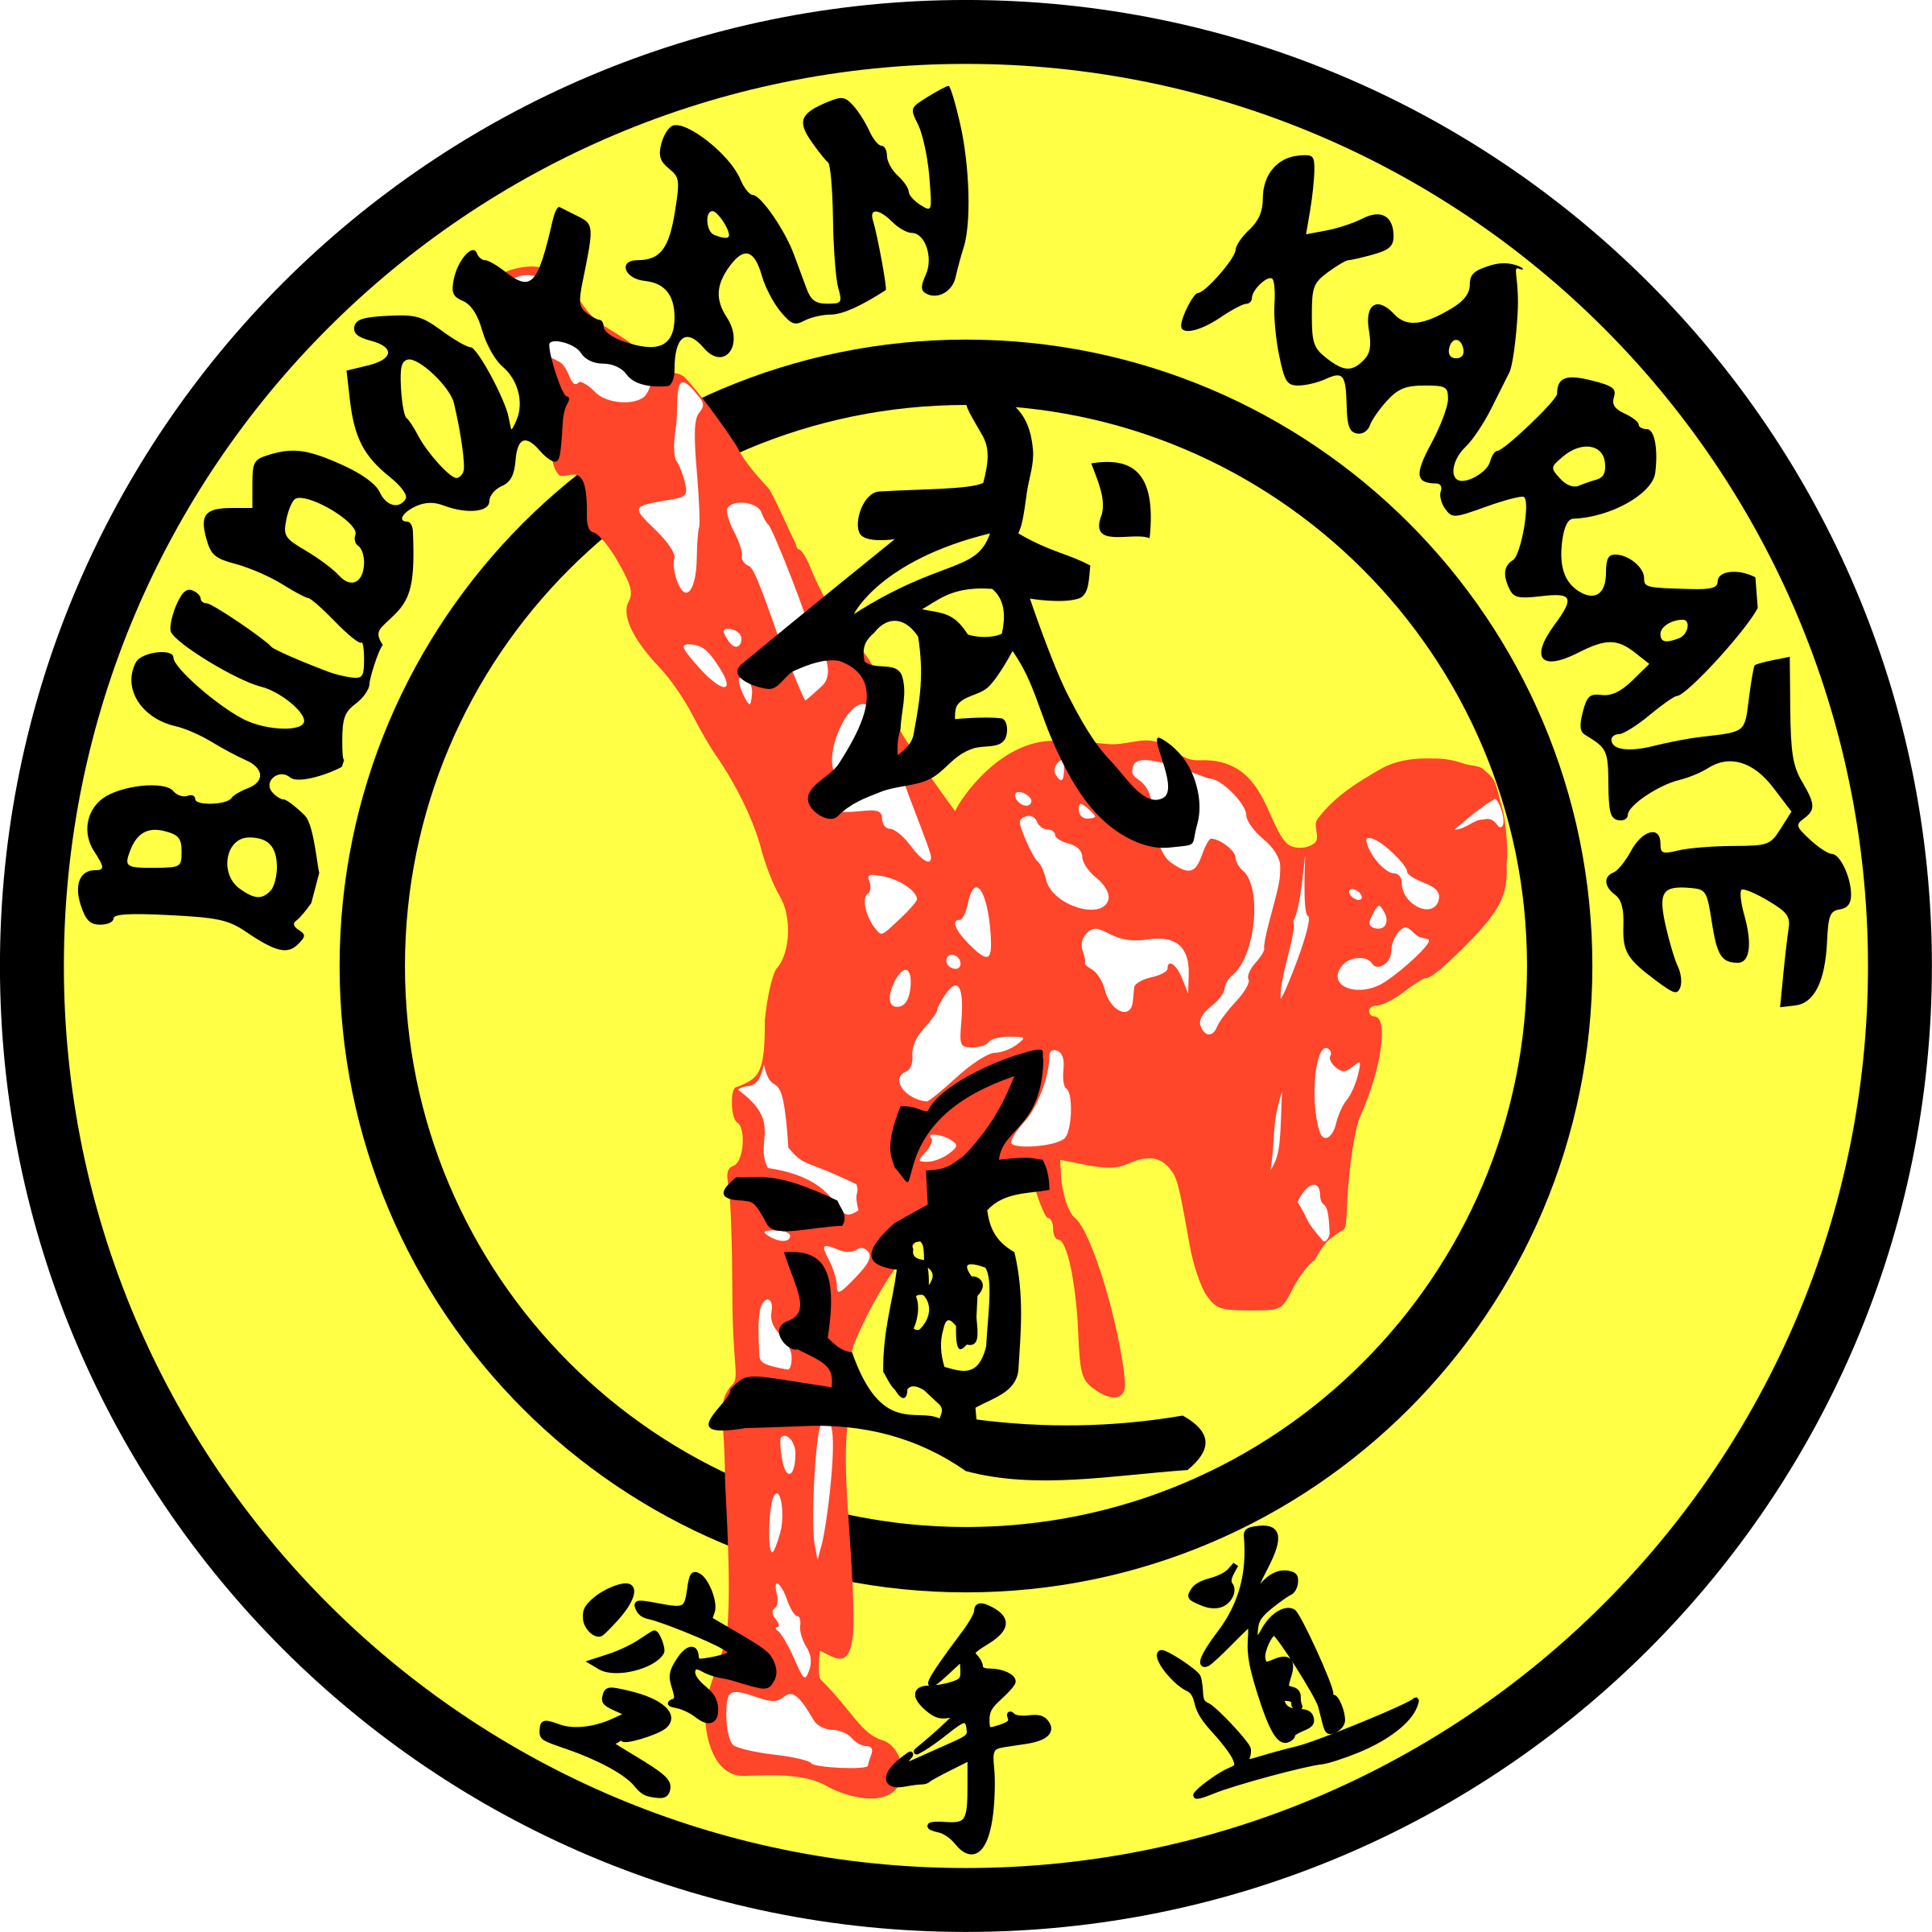 This Free Icons Png Design Of Budokan Karate-do Logo - Halal Food Council Of Europe Logo Clipart (2400x2400), Png Download